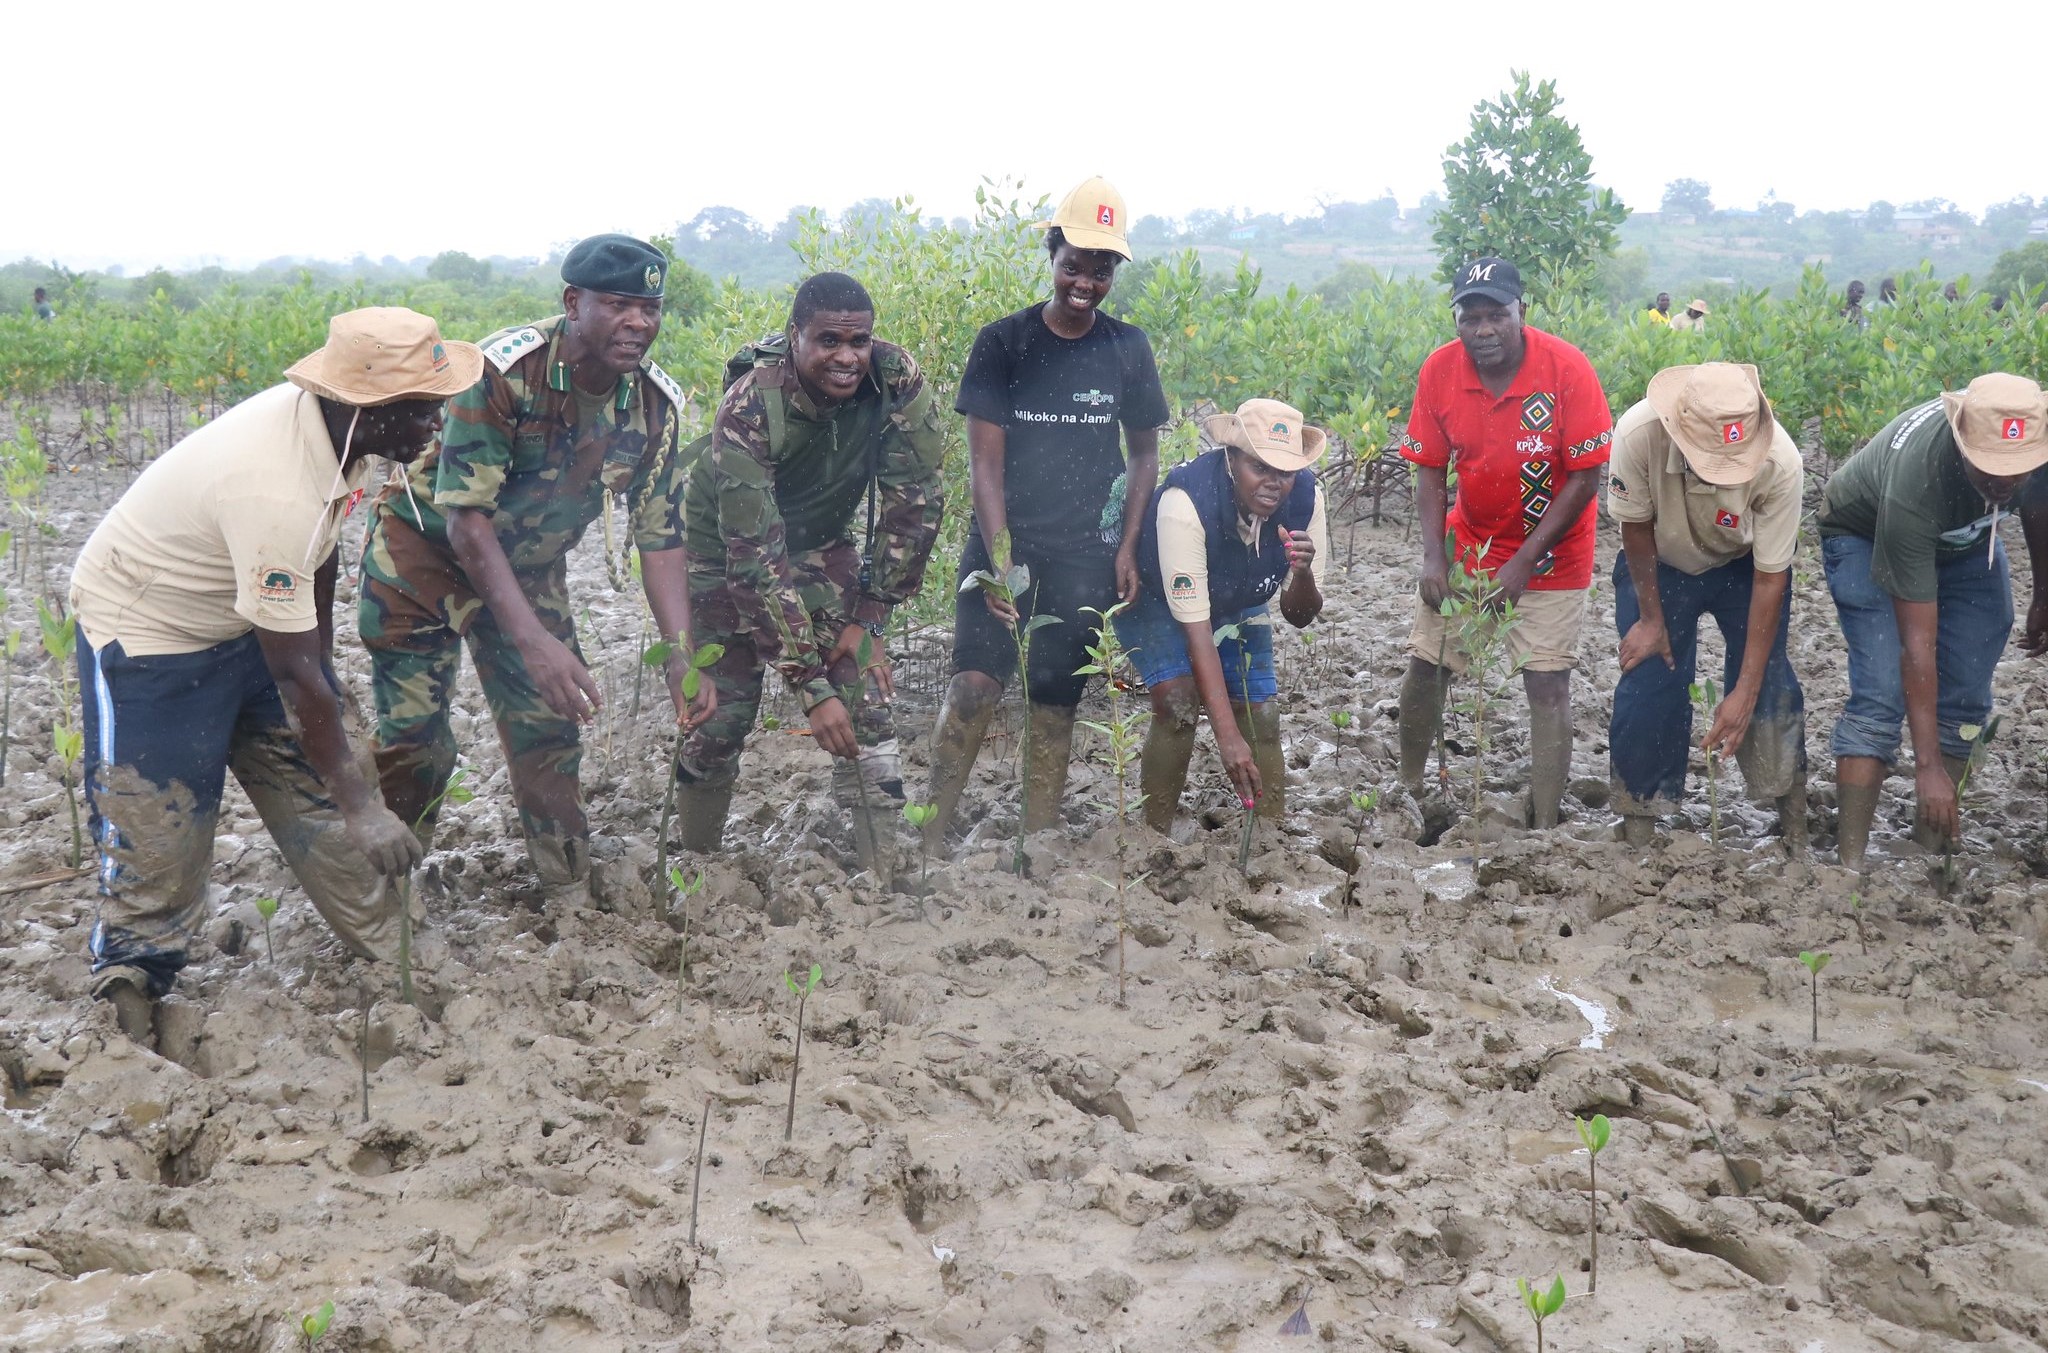 KPC Commemorates Anniversary with Tree Planting Excercise